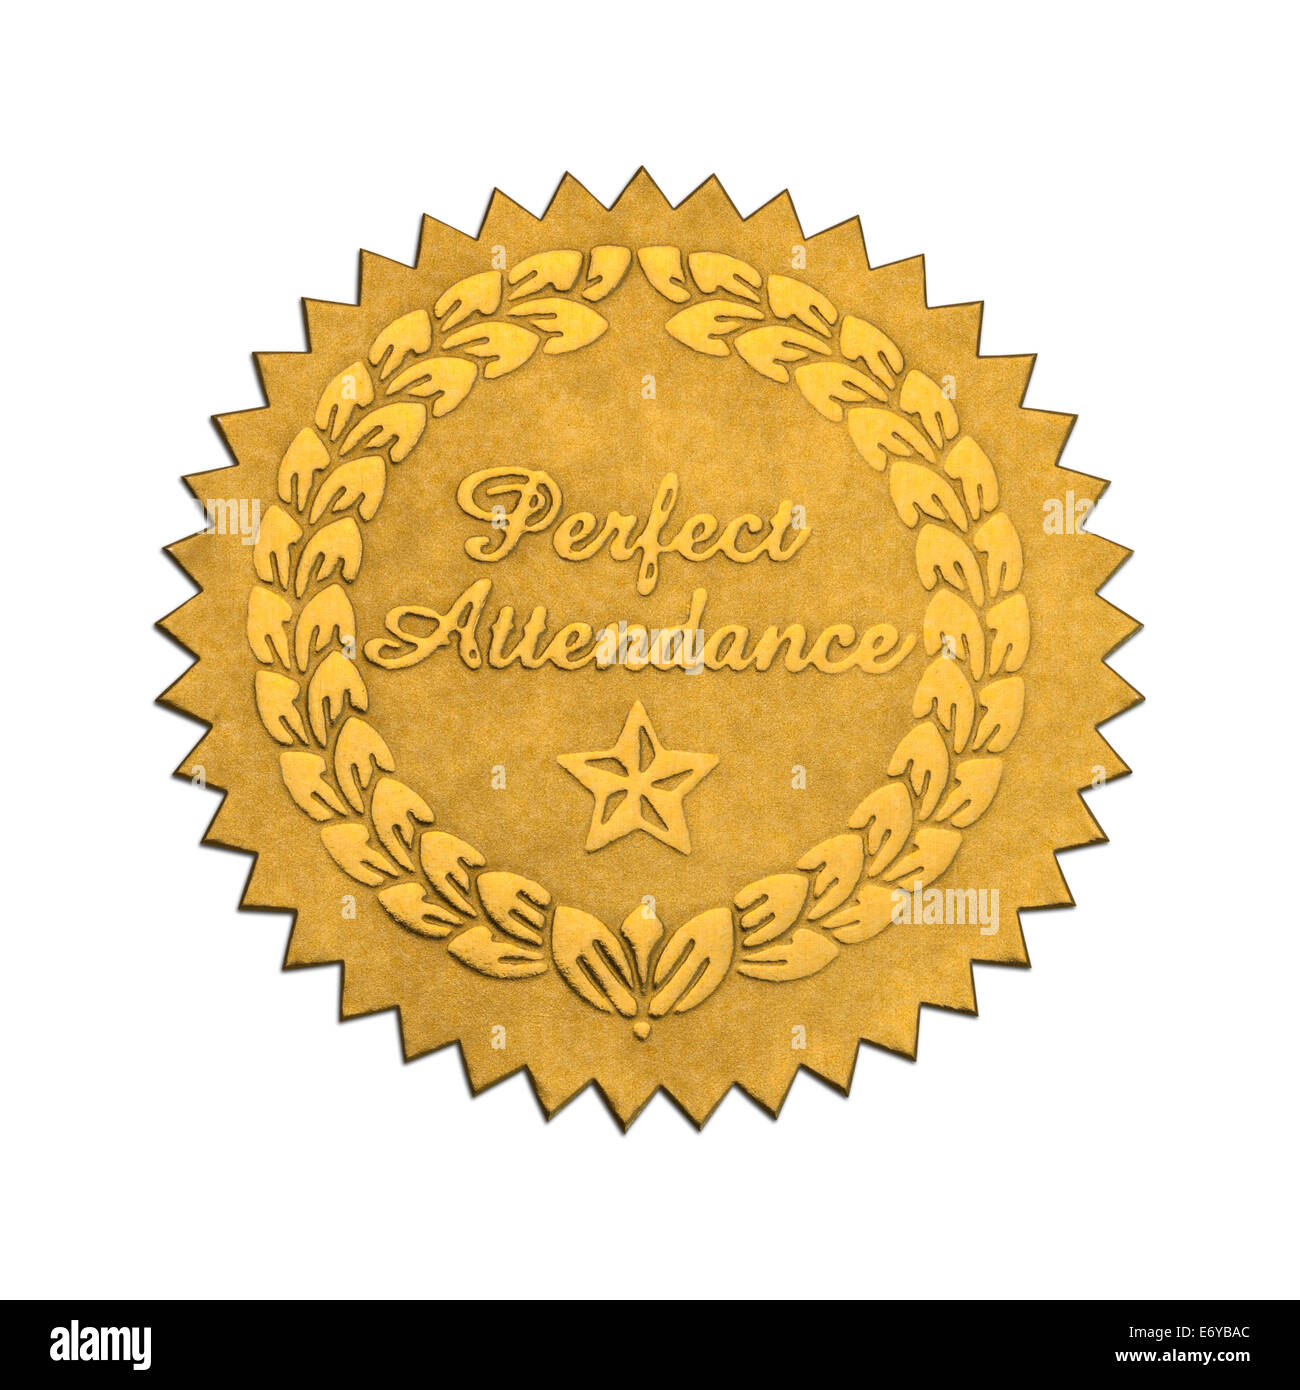 Gold Star Foil Seal Perfect Attendance Isolated on White Background. Stock Photo